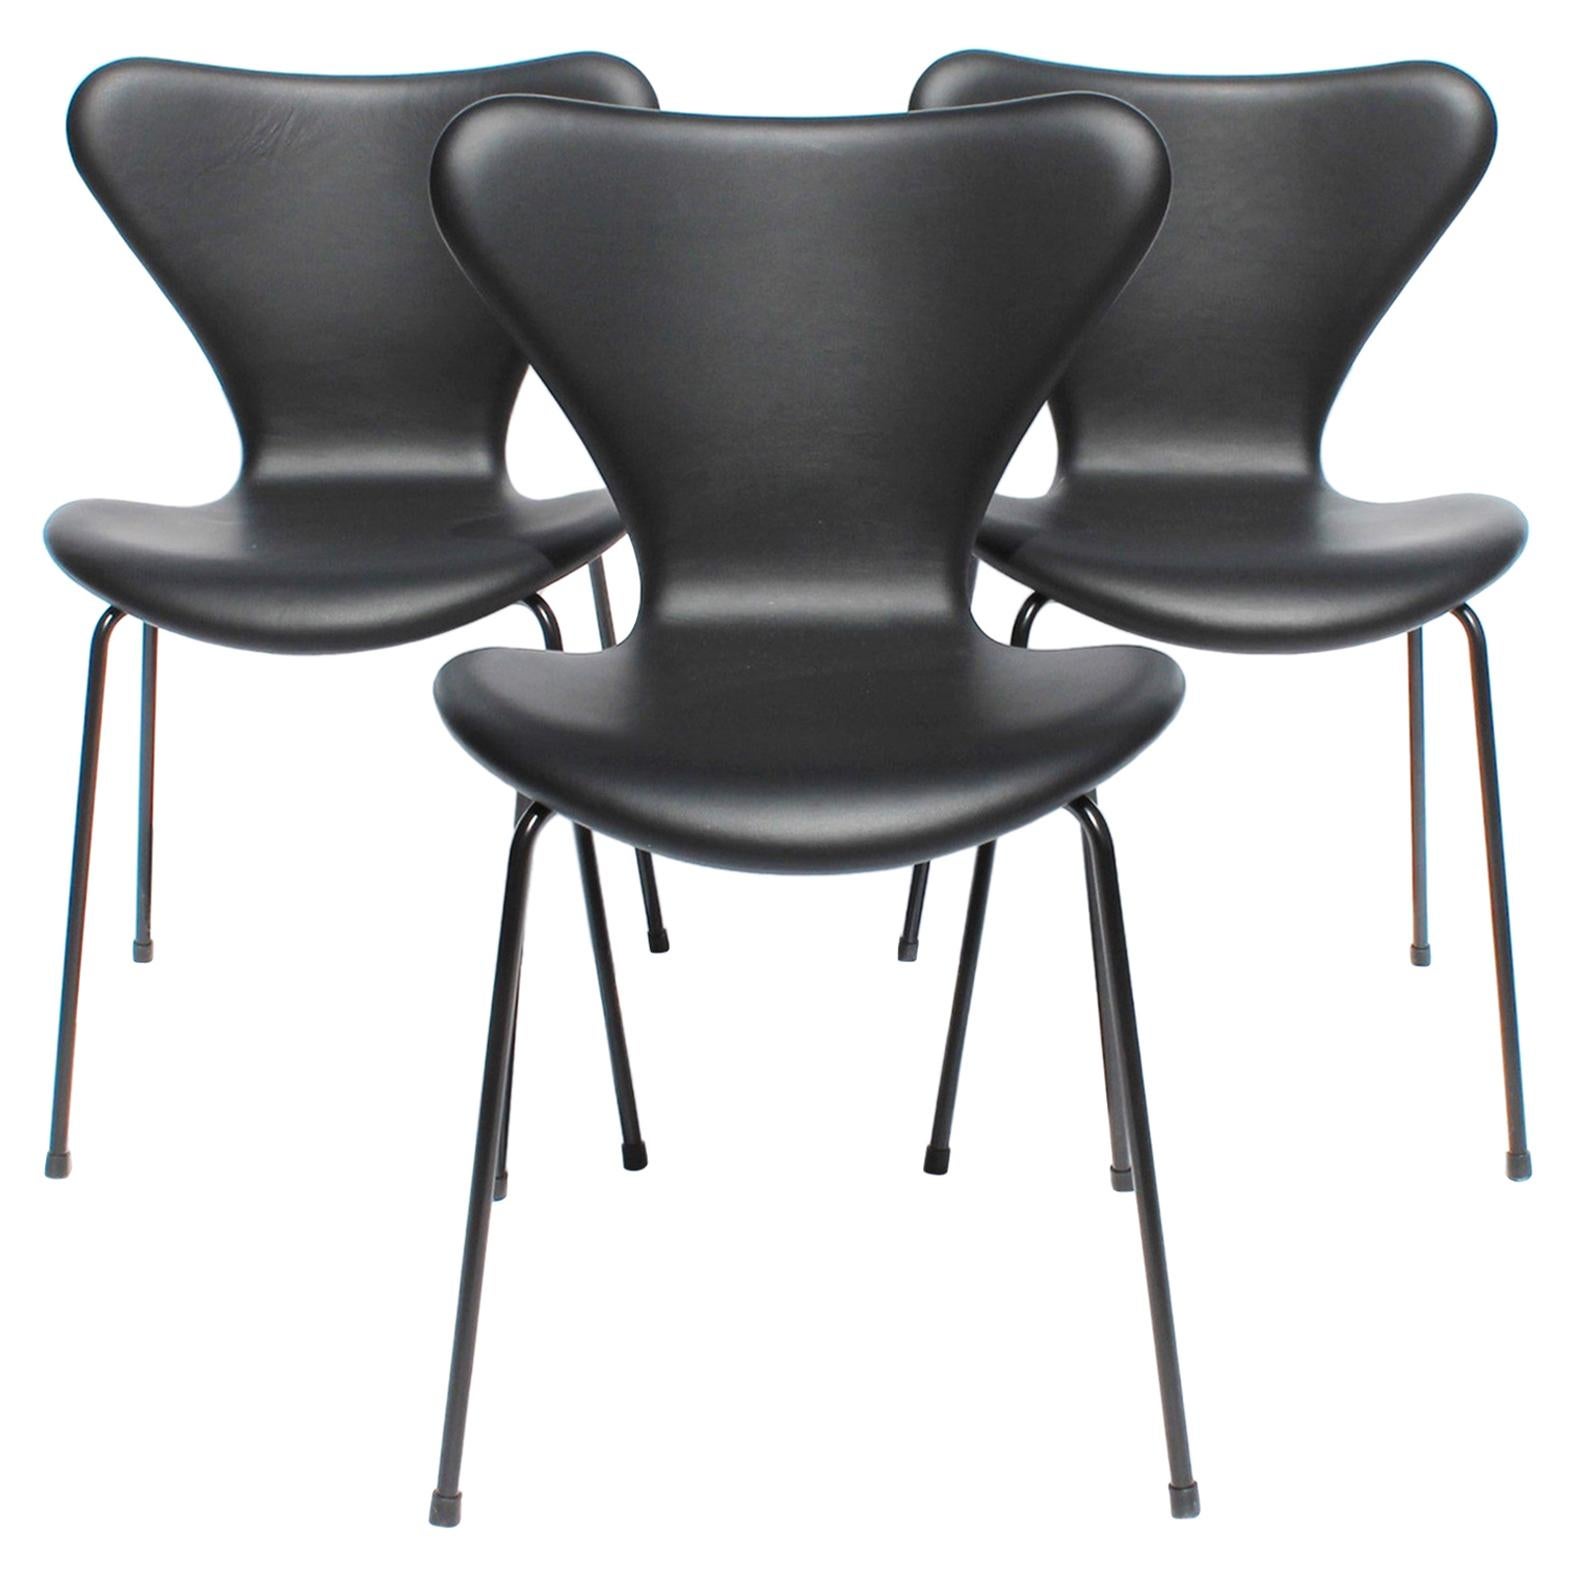 Set of Three Series Seven Chairs, Model 3107, by Arne Jacobsen and Fritz Hansen